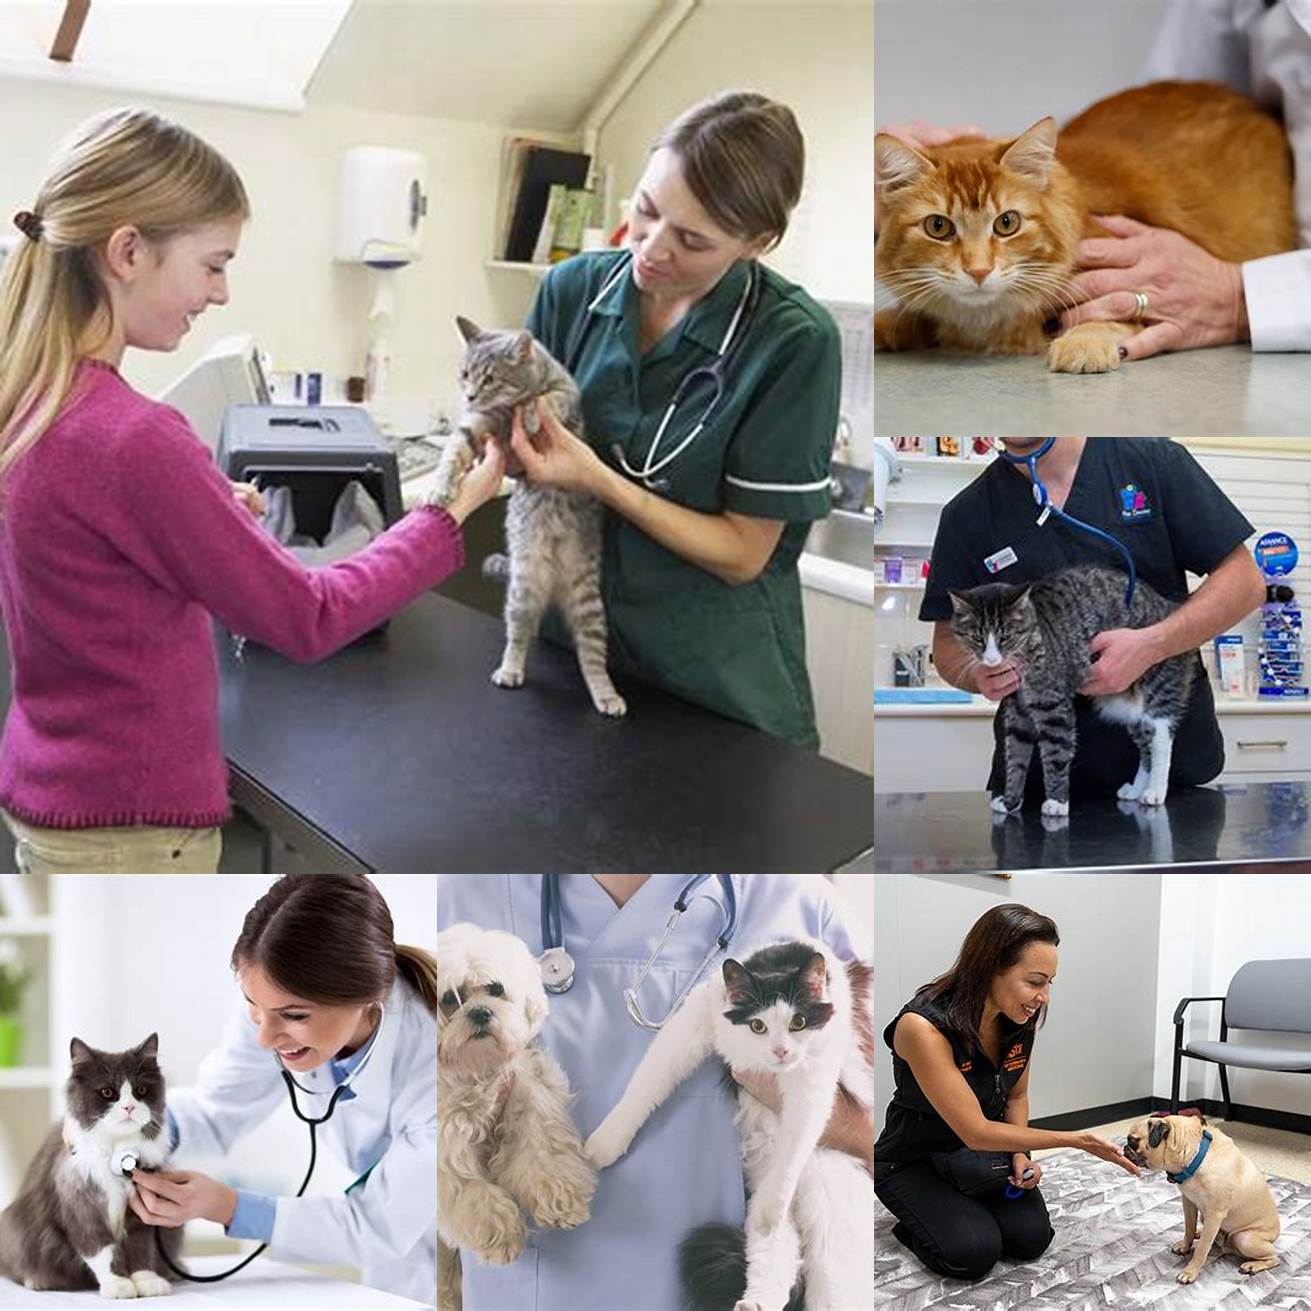 Consult with a veterinarian or animal behaviorist for additional guidance and support